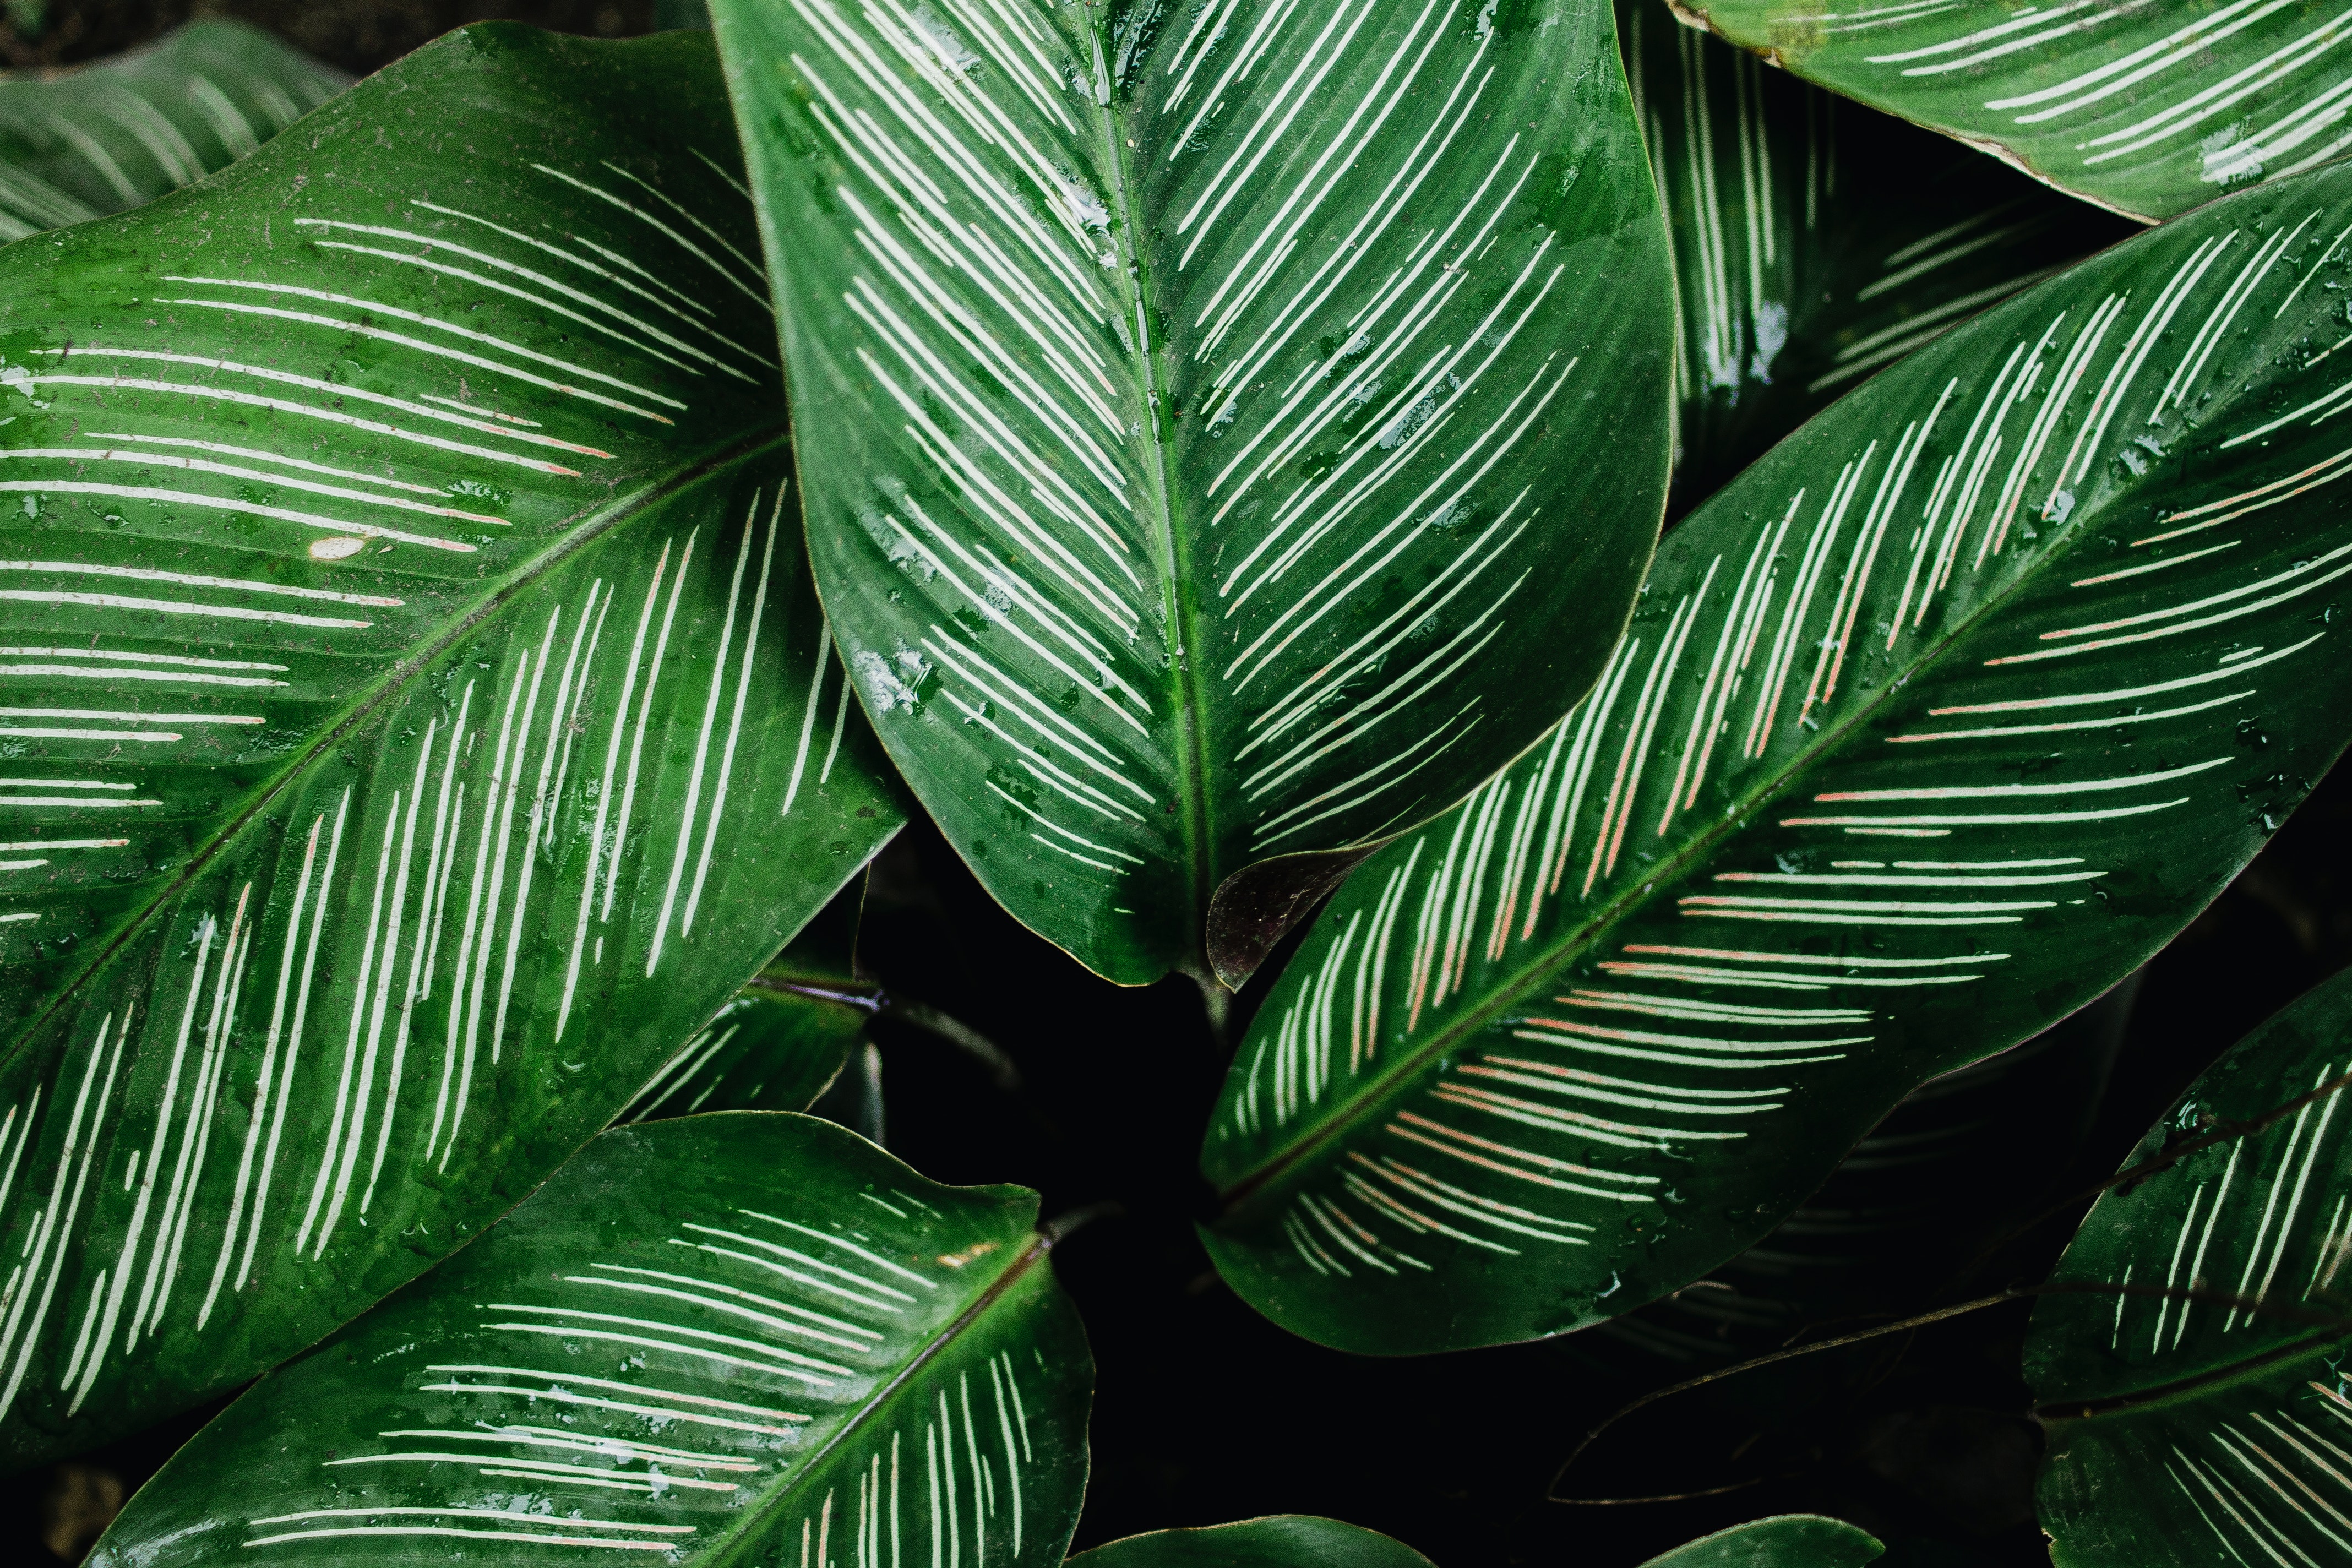 Green Plant Wallpapers